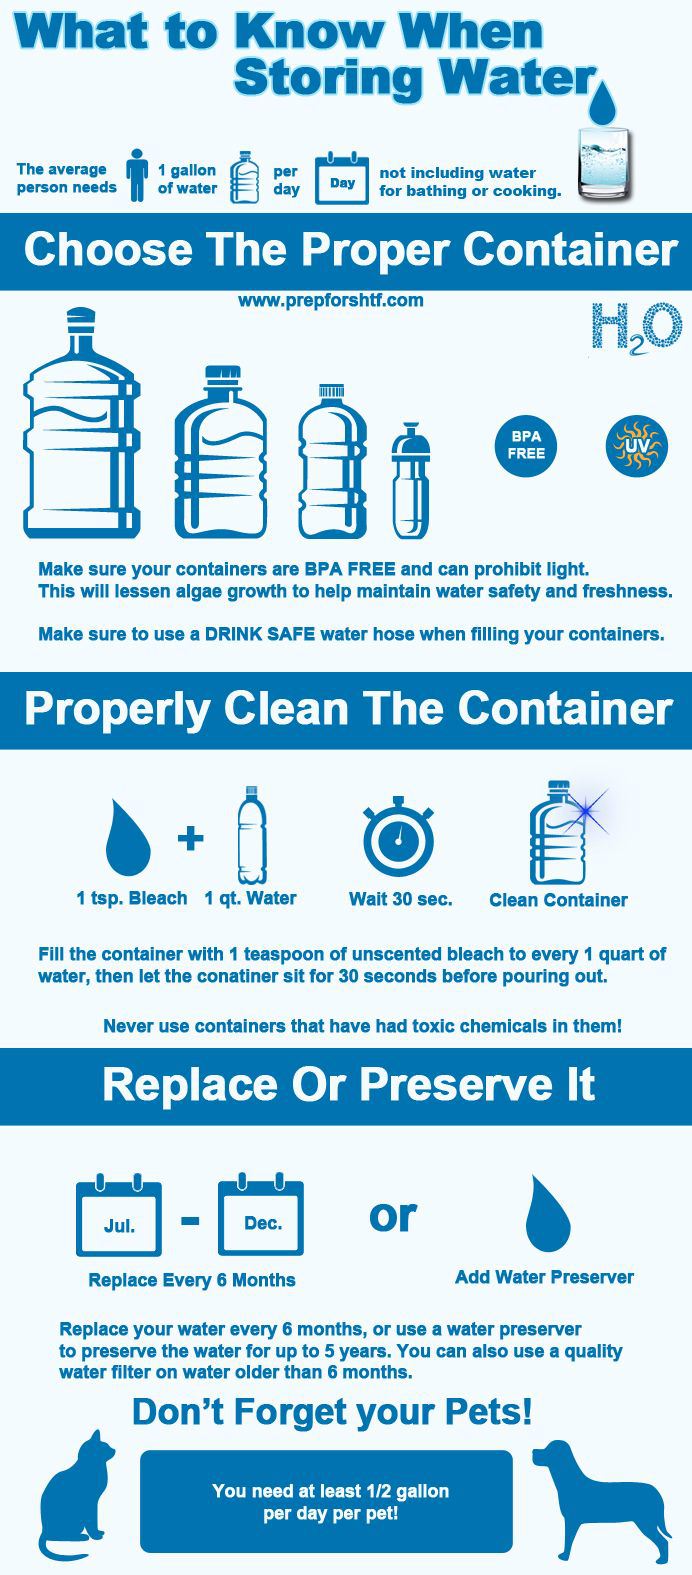 BLU-MED-water-info-graphic